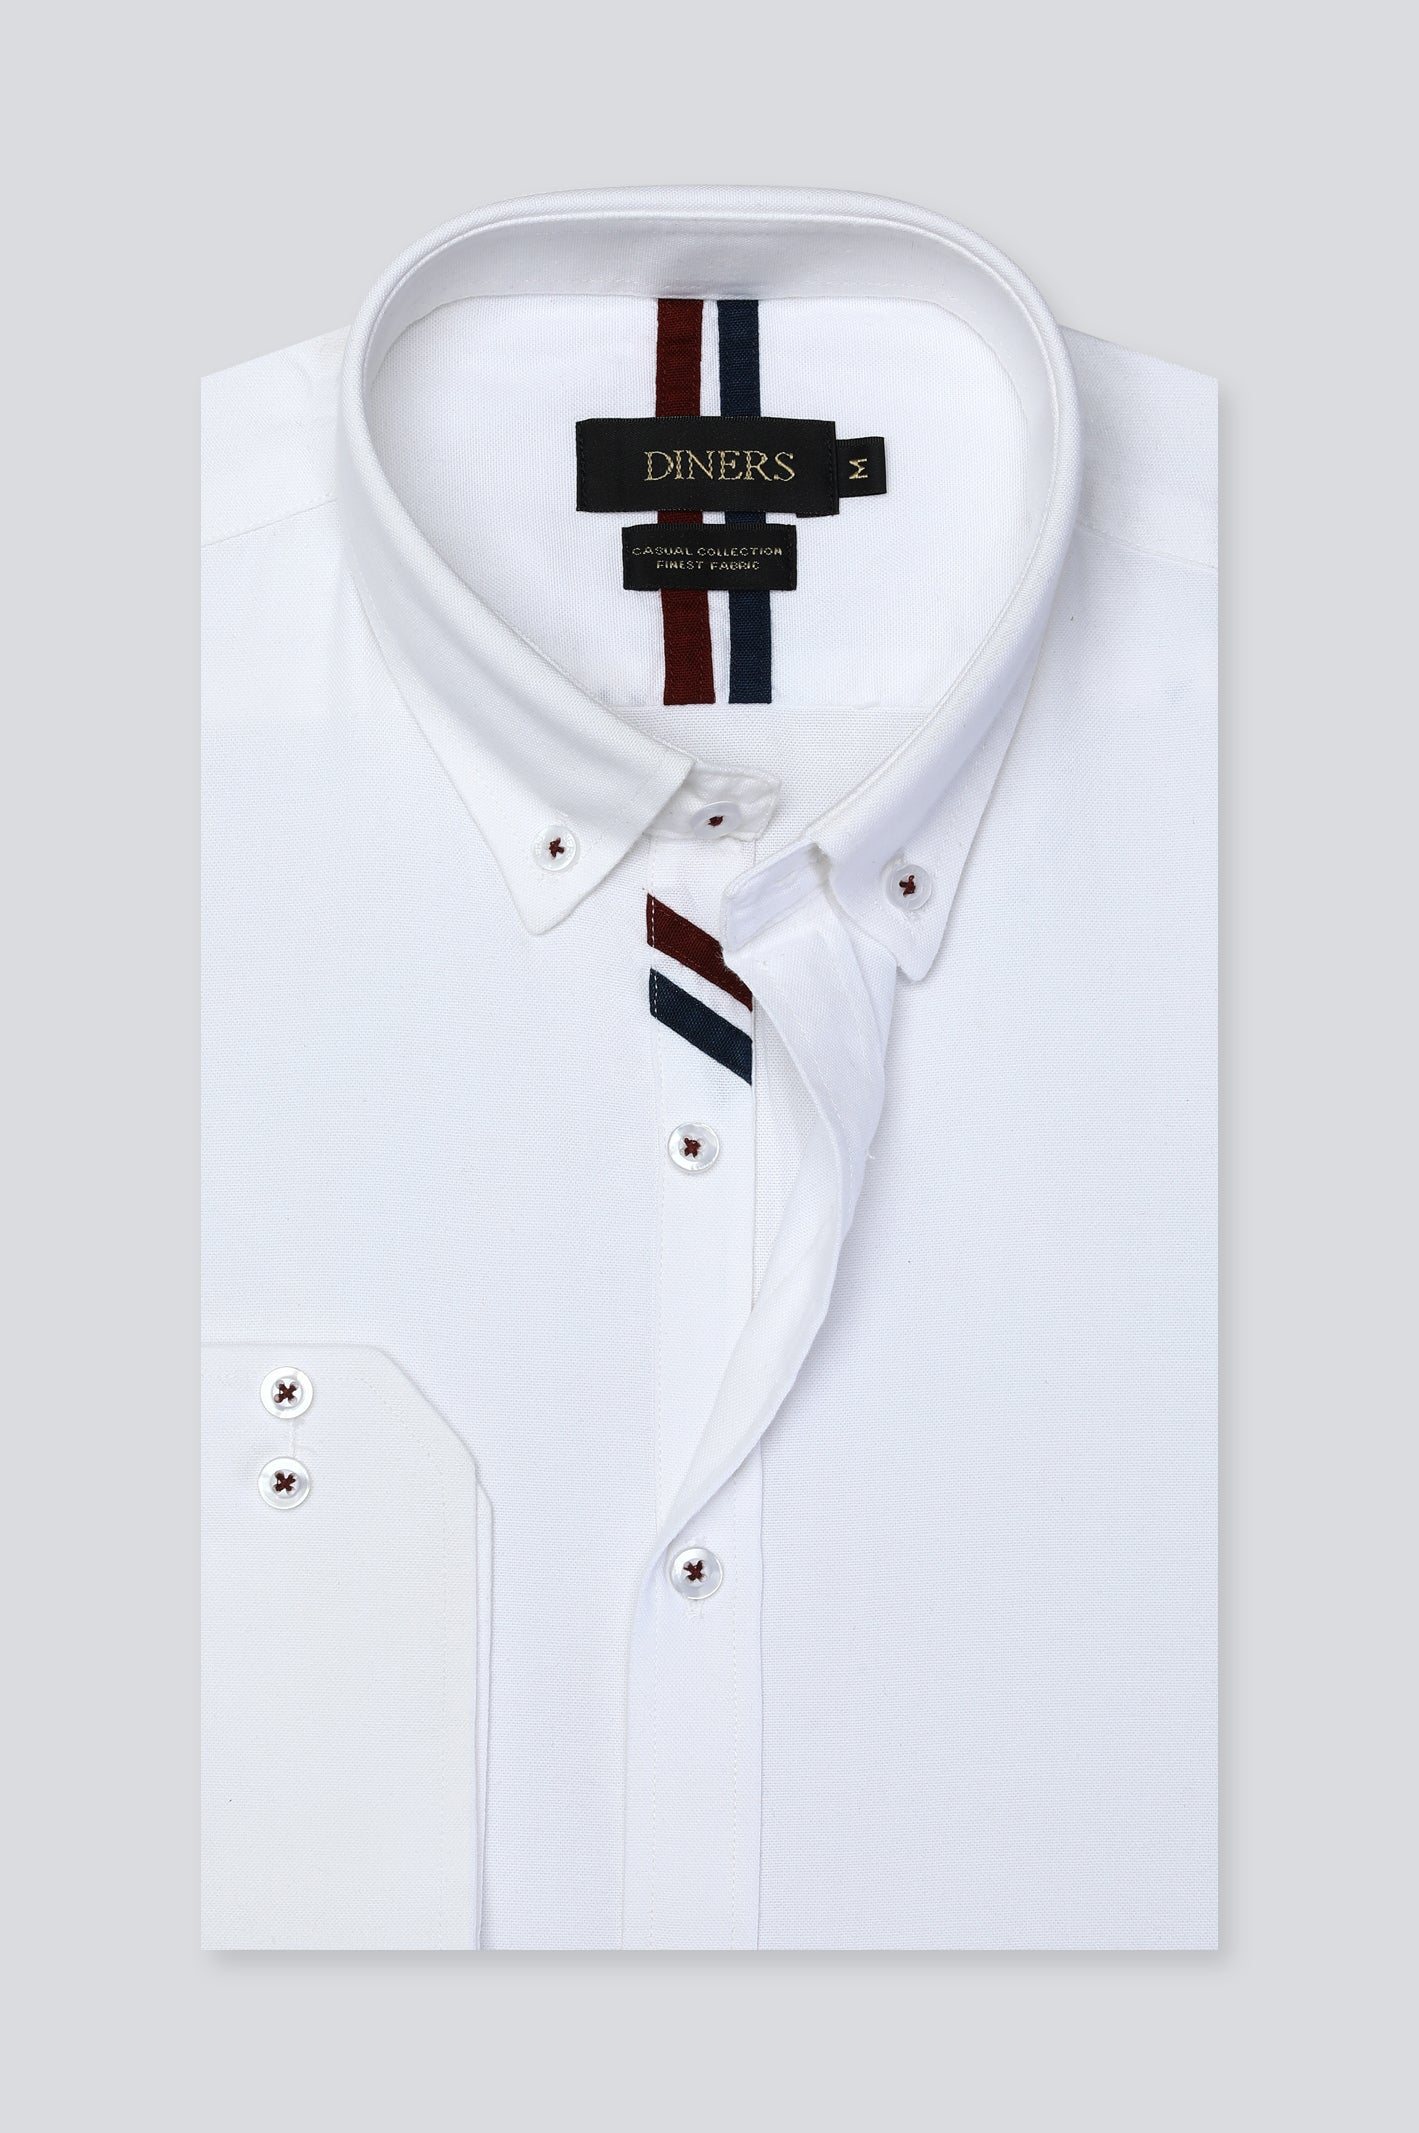 Casual Shirt for Men - Diners